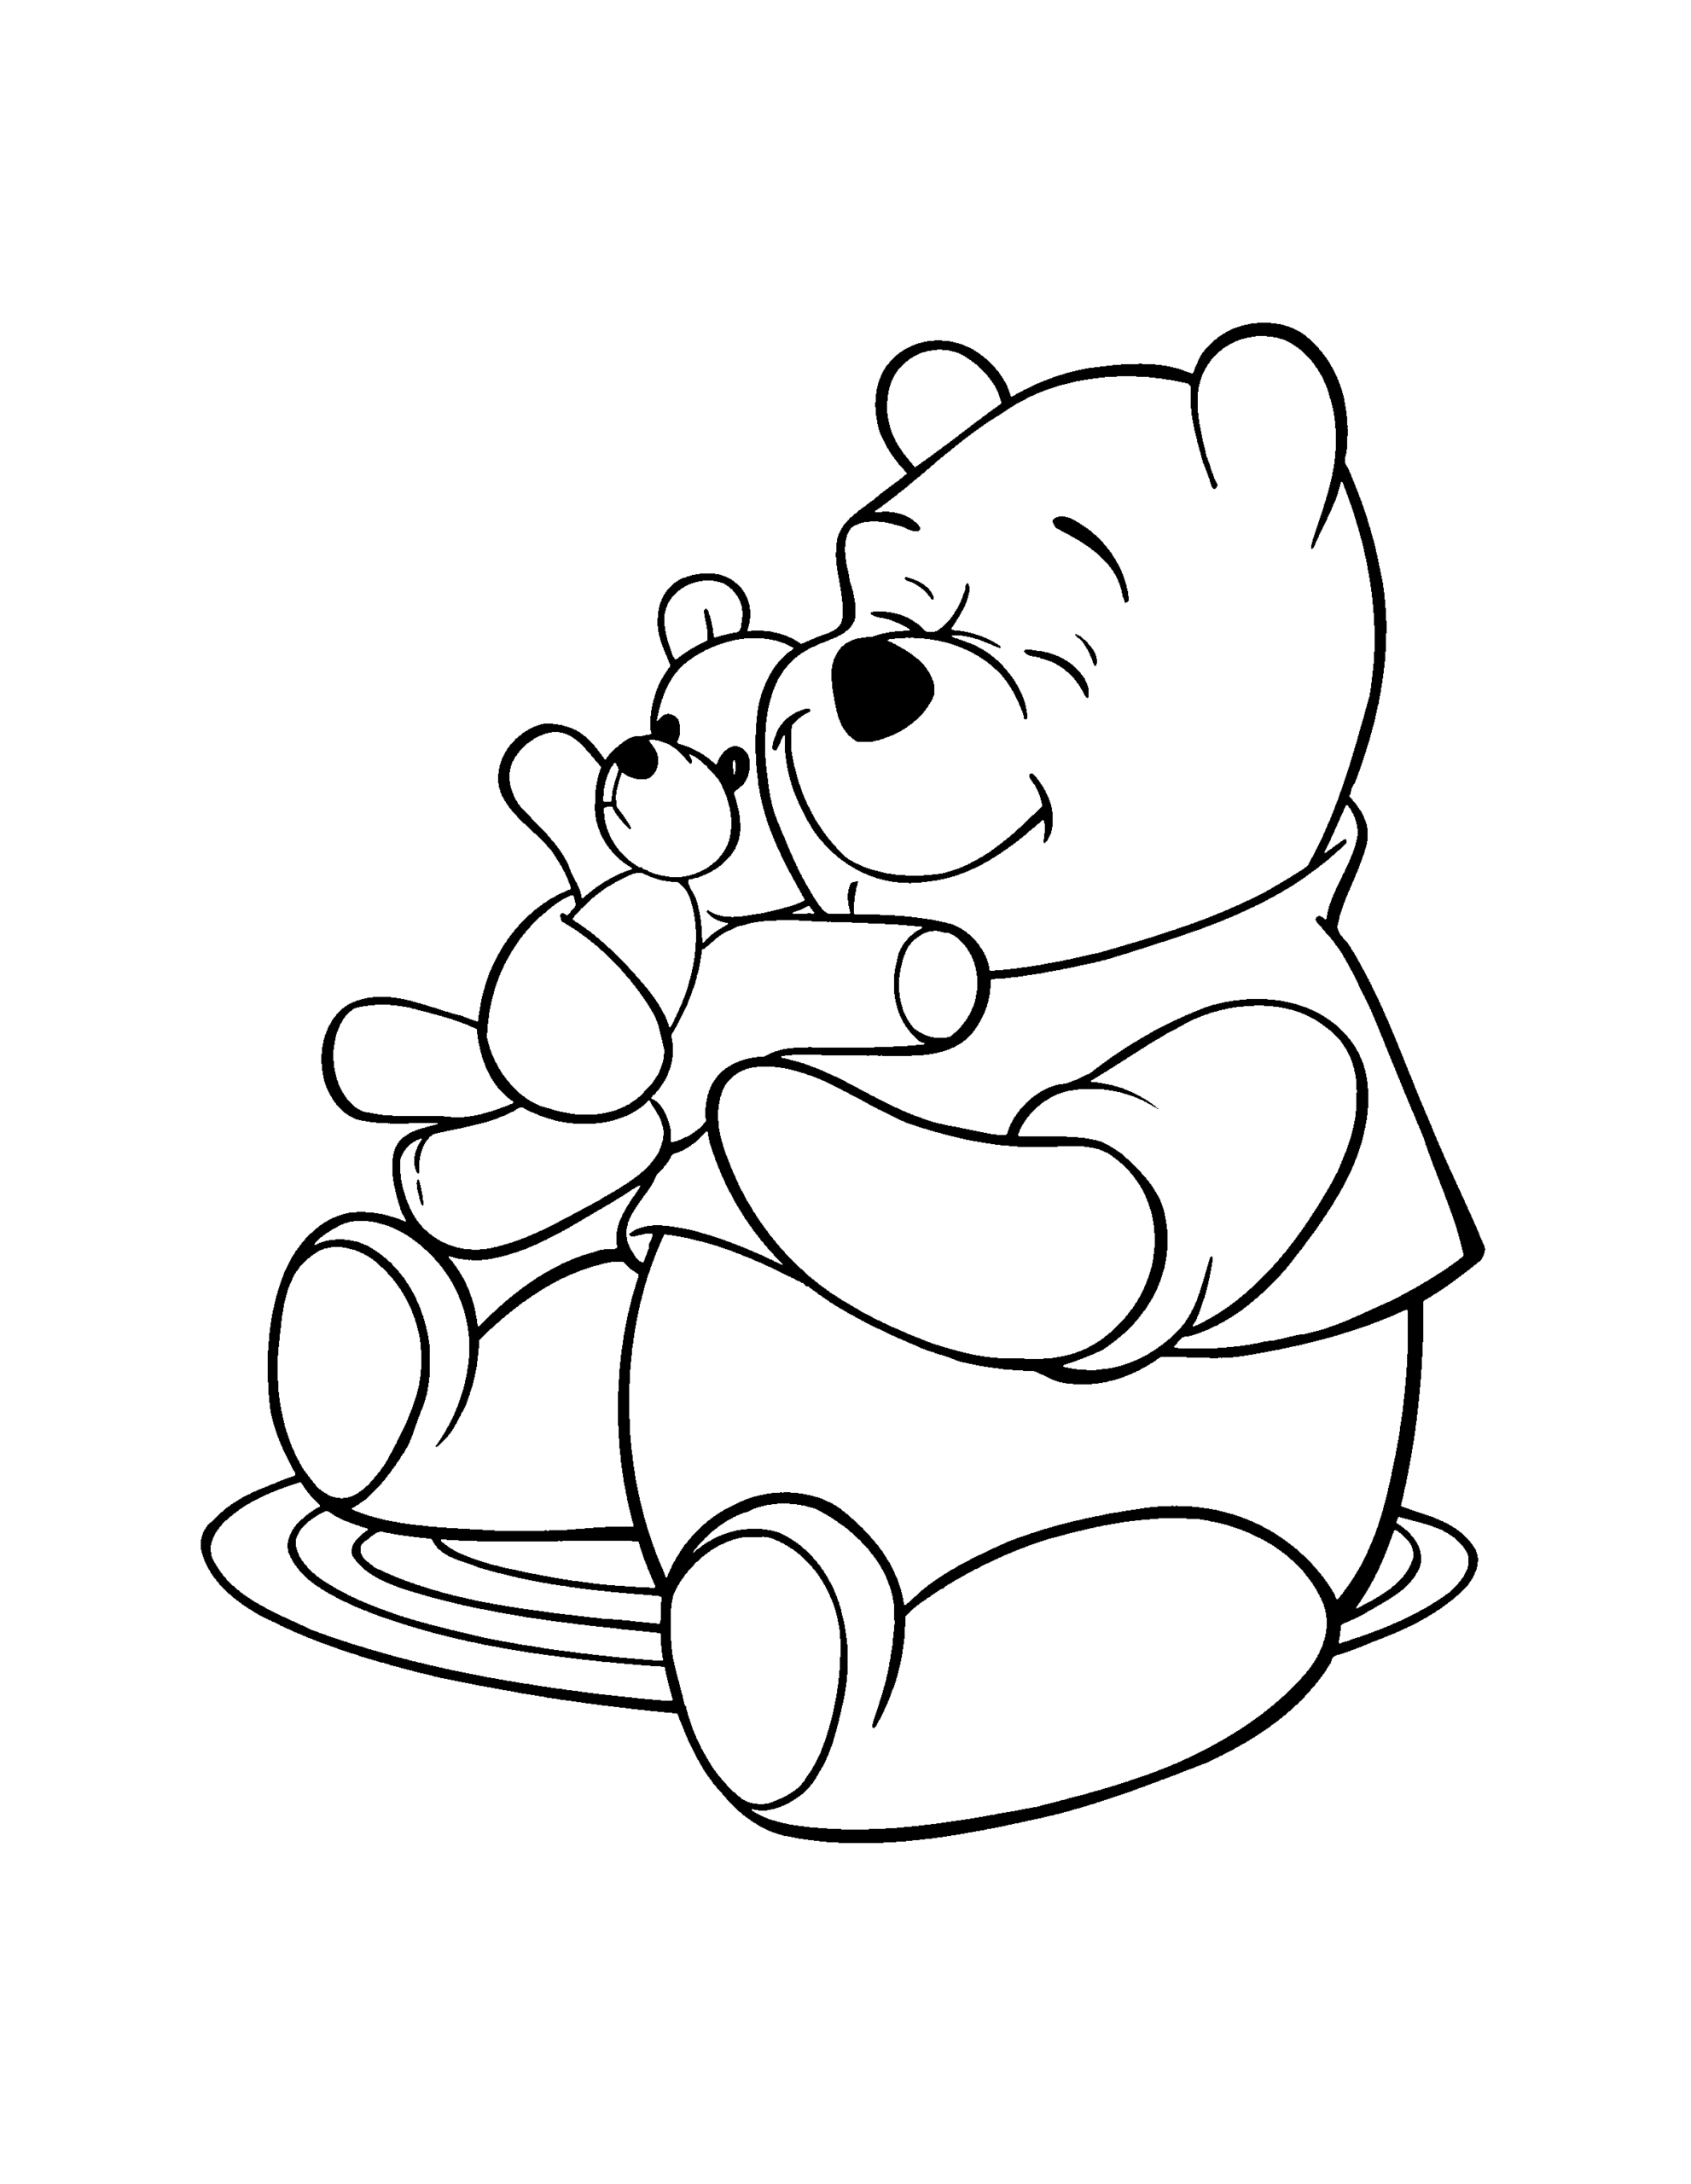 Winnie the Pooh Coloring Pages Cartoons winnie the pooh 80 Printable 2020 7201 Coloring4free